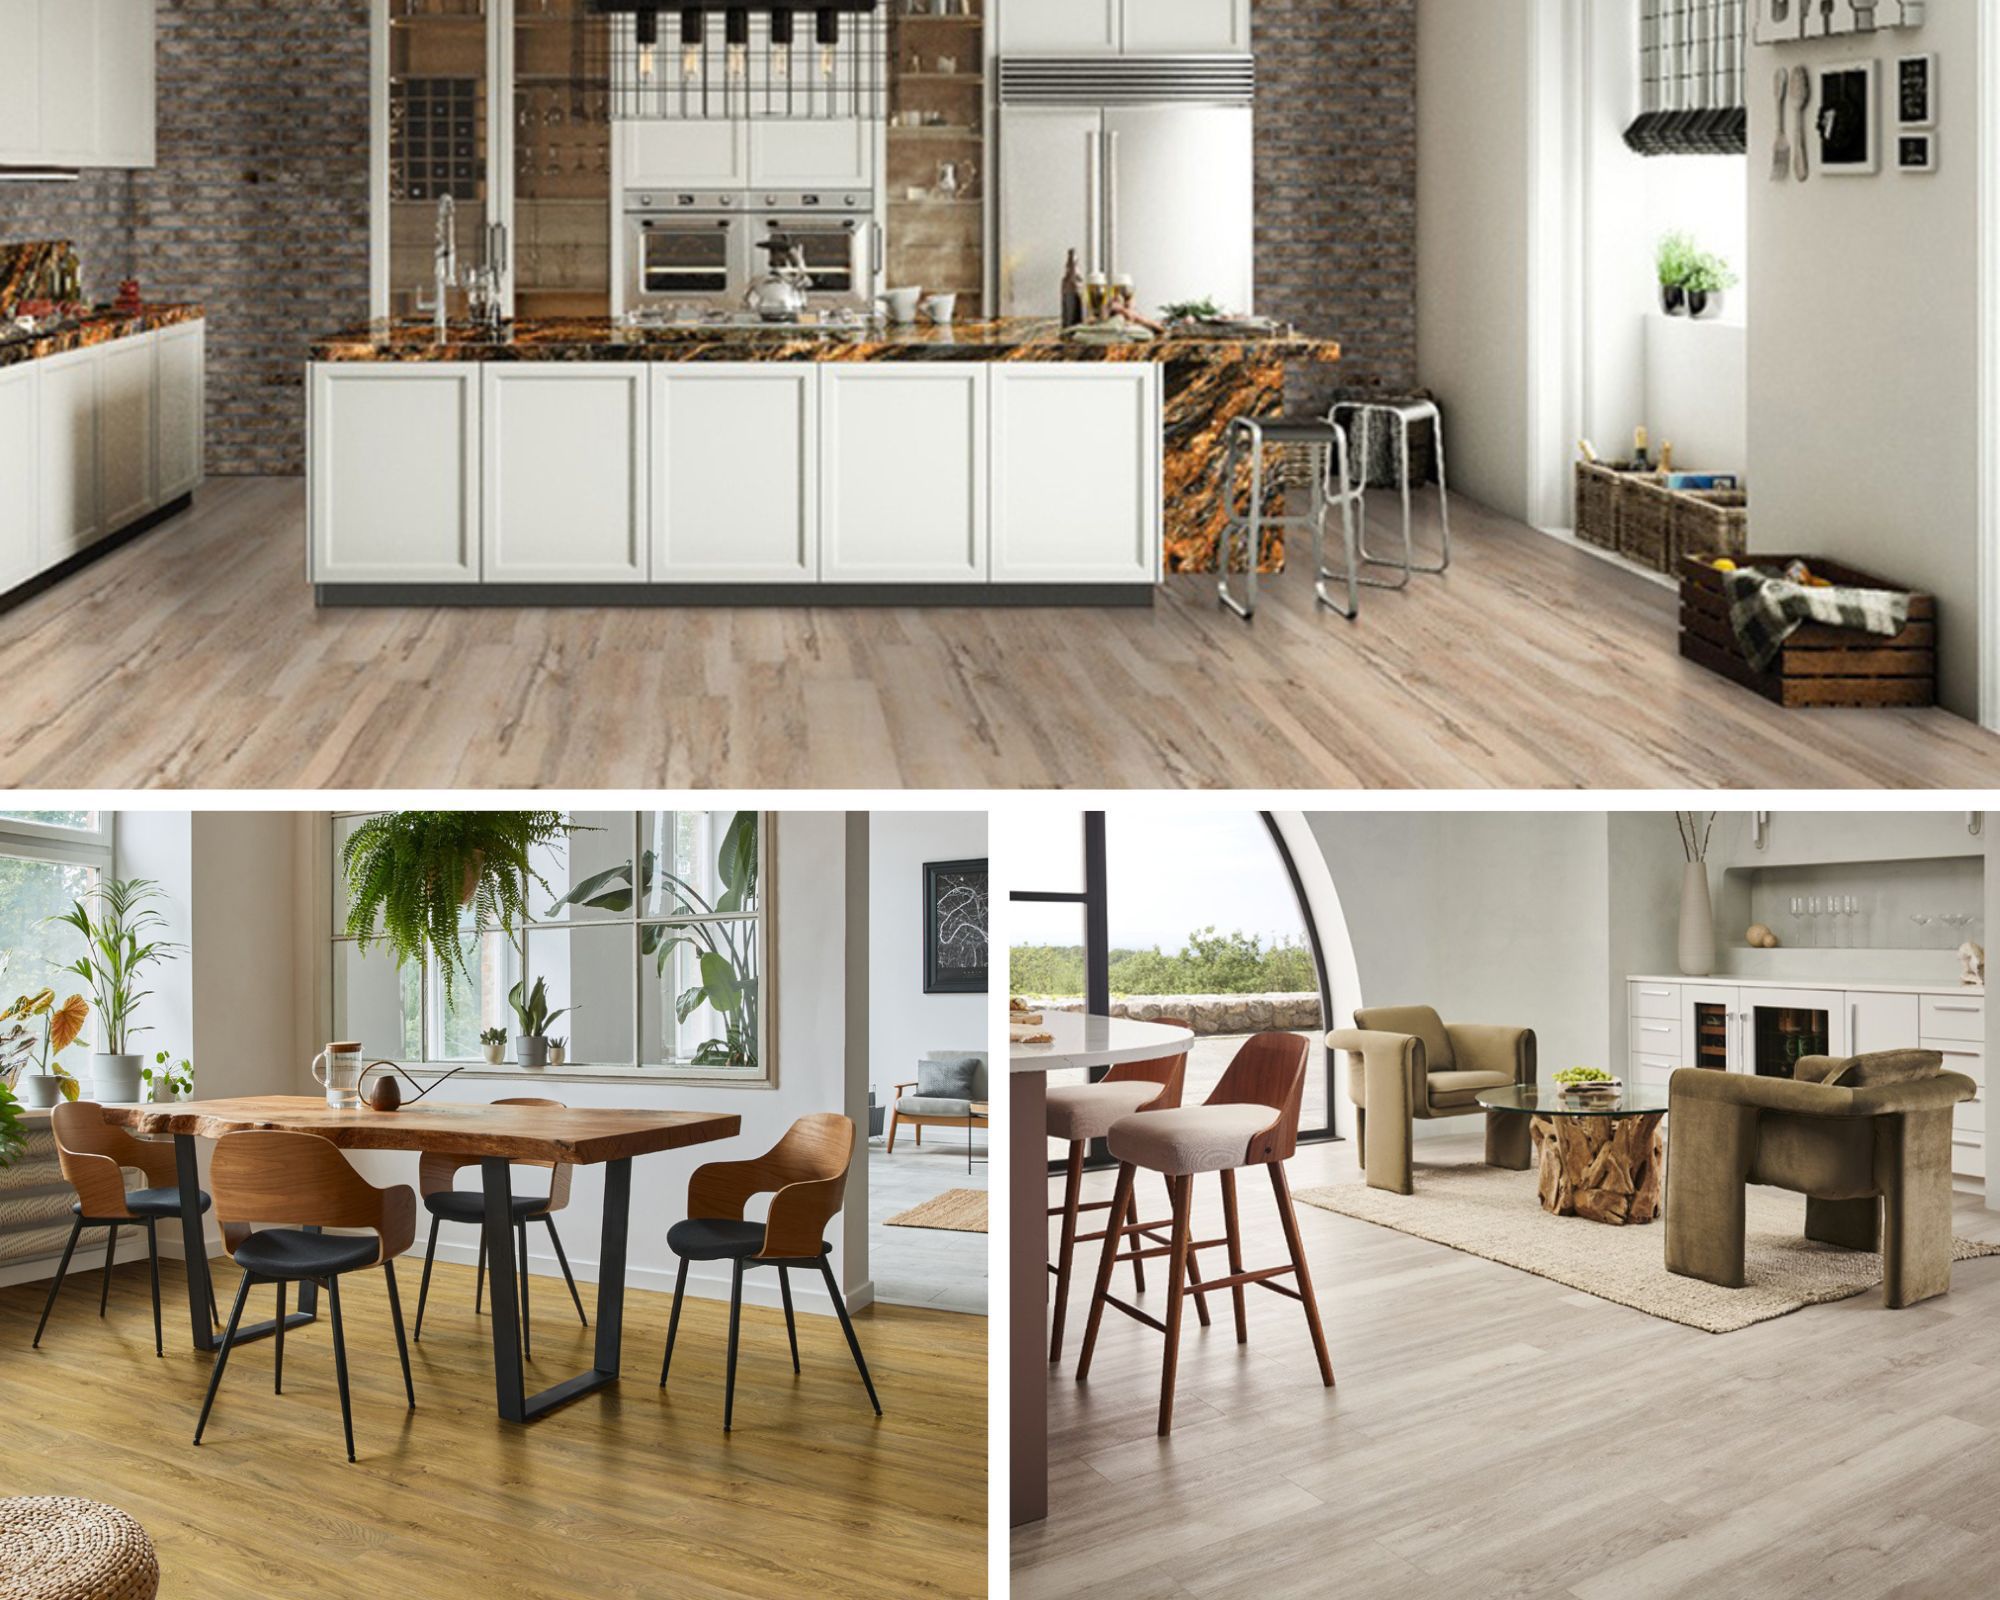 7 Realistic Wood Look Planks From The Everlife® Luxury Vinyl Flooring Collection